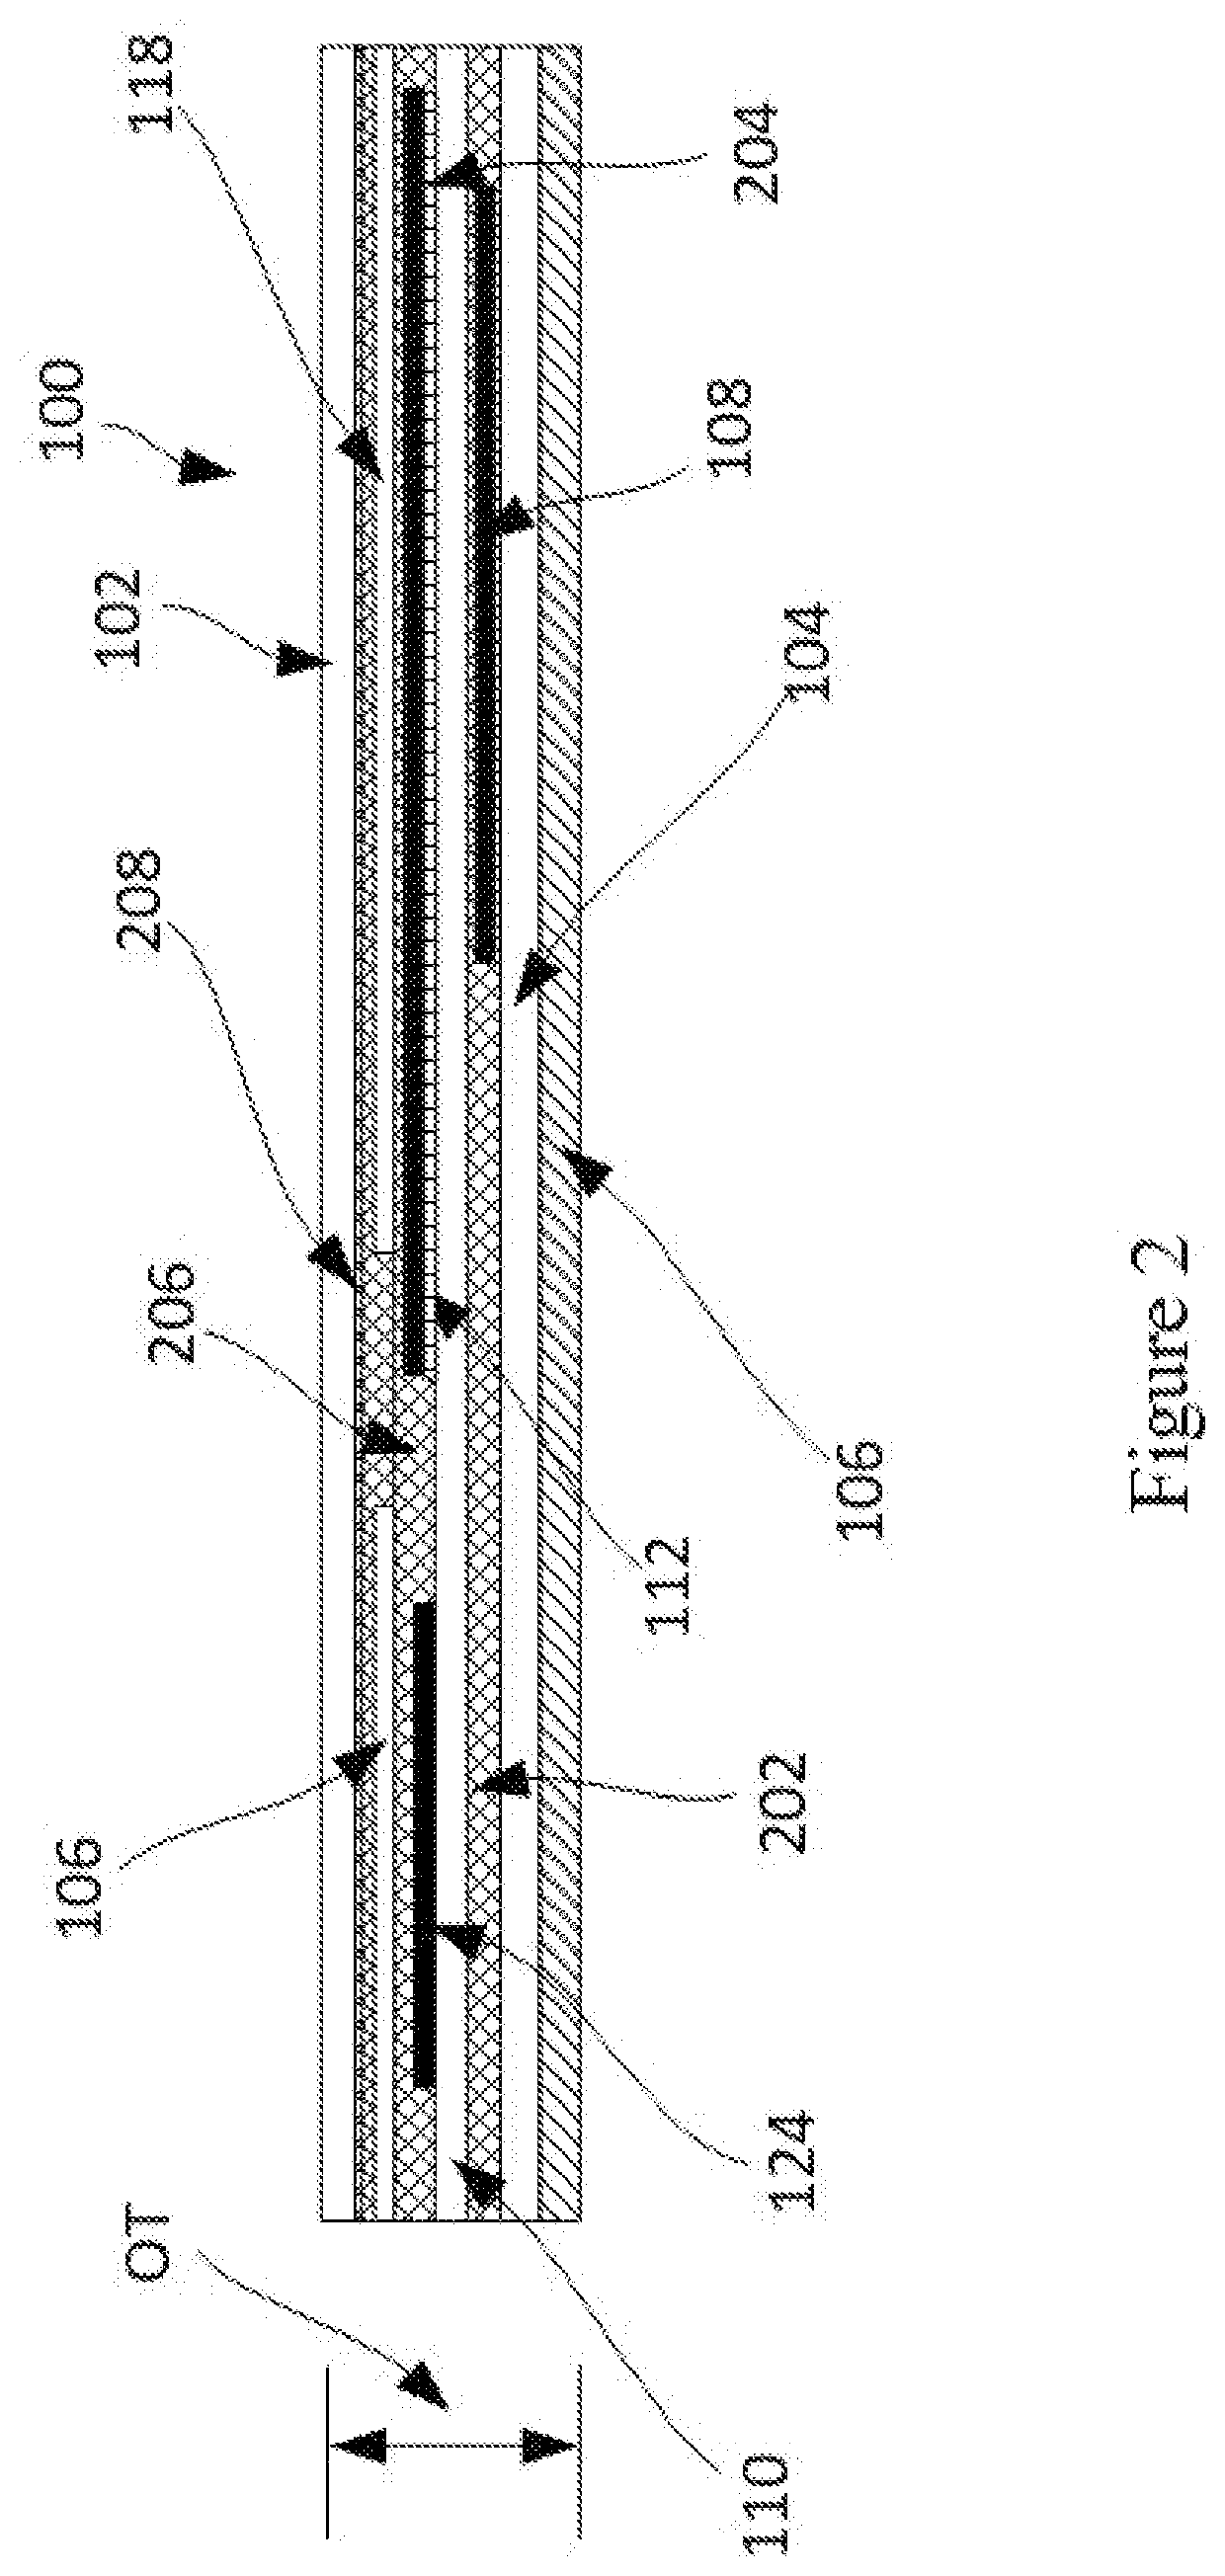 System and method for sensing vibrations in equipment